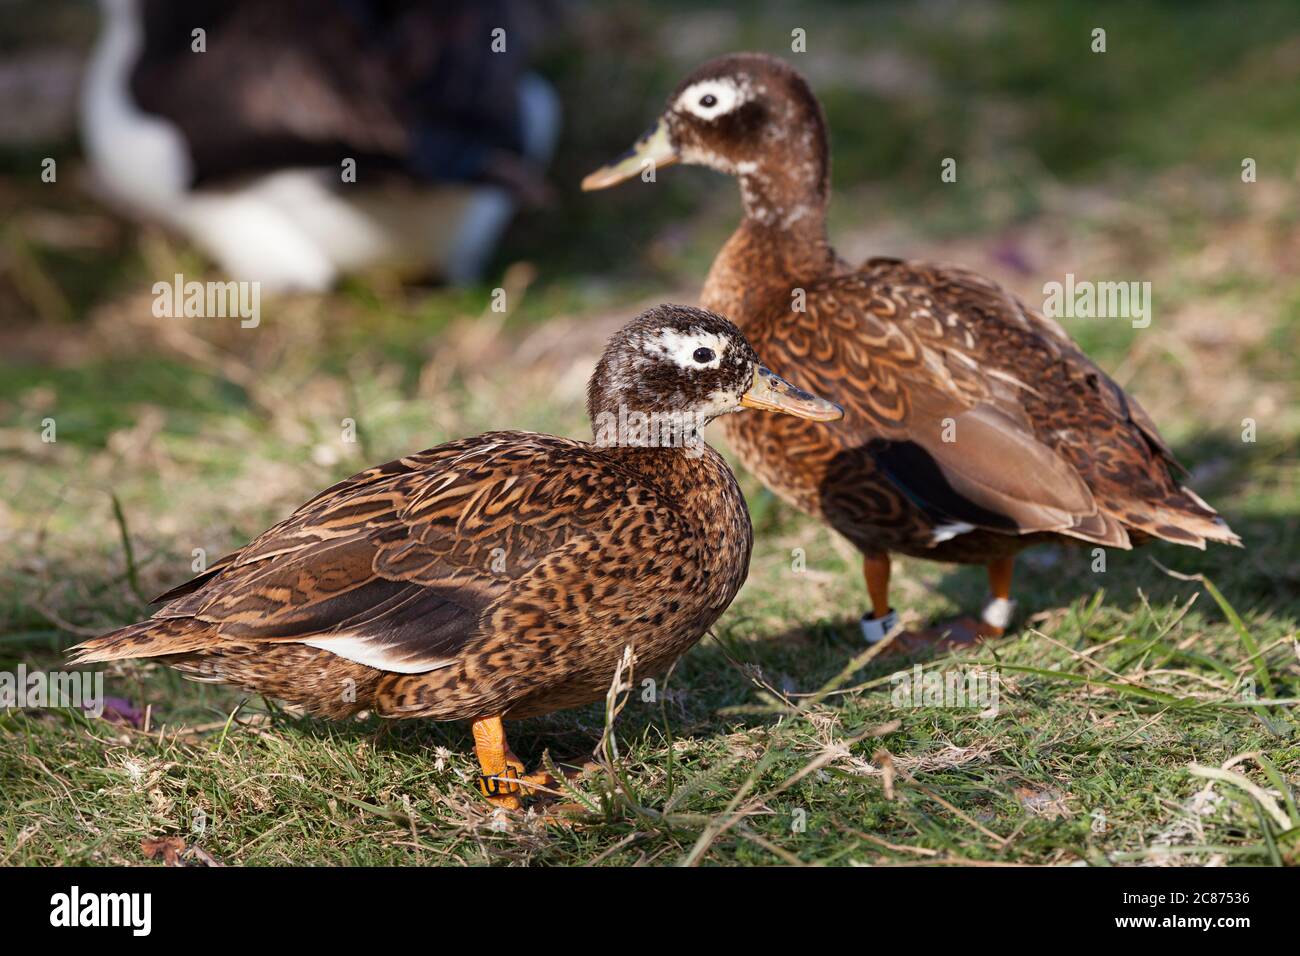 Laysan ducks or Laysan teal, Anas laysanensis, the rarest duck in the world ( Critically Endangered ), with Laysan albatross in background, Midway Stock Photo